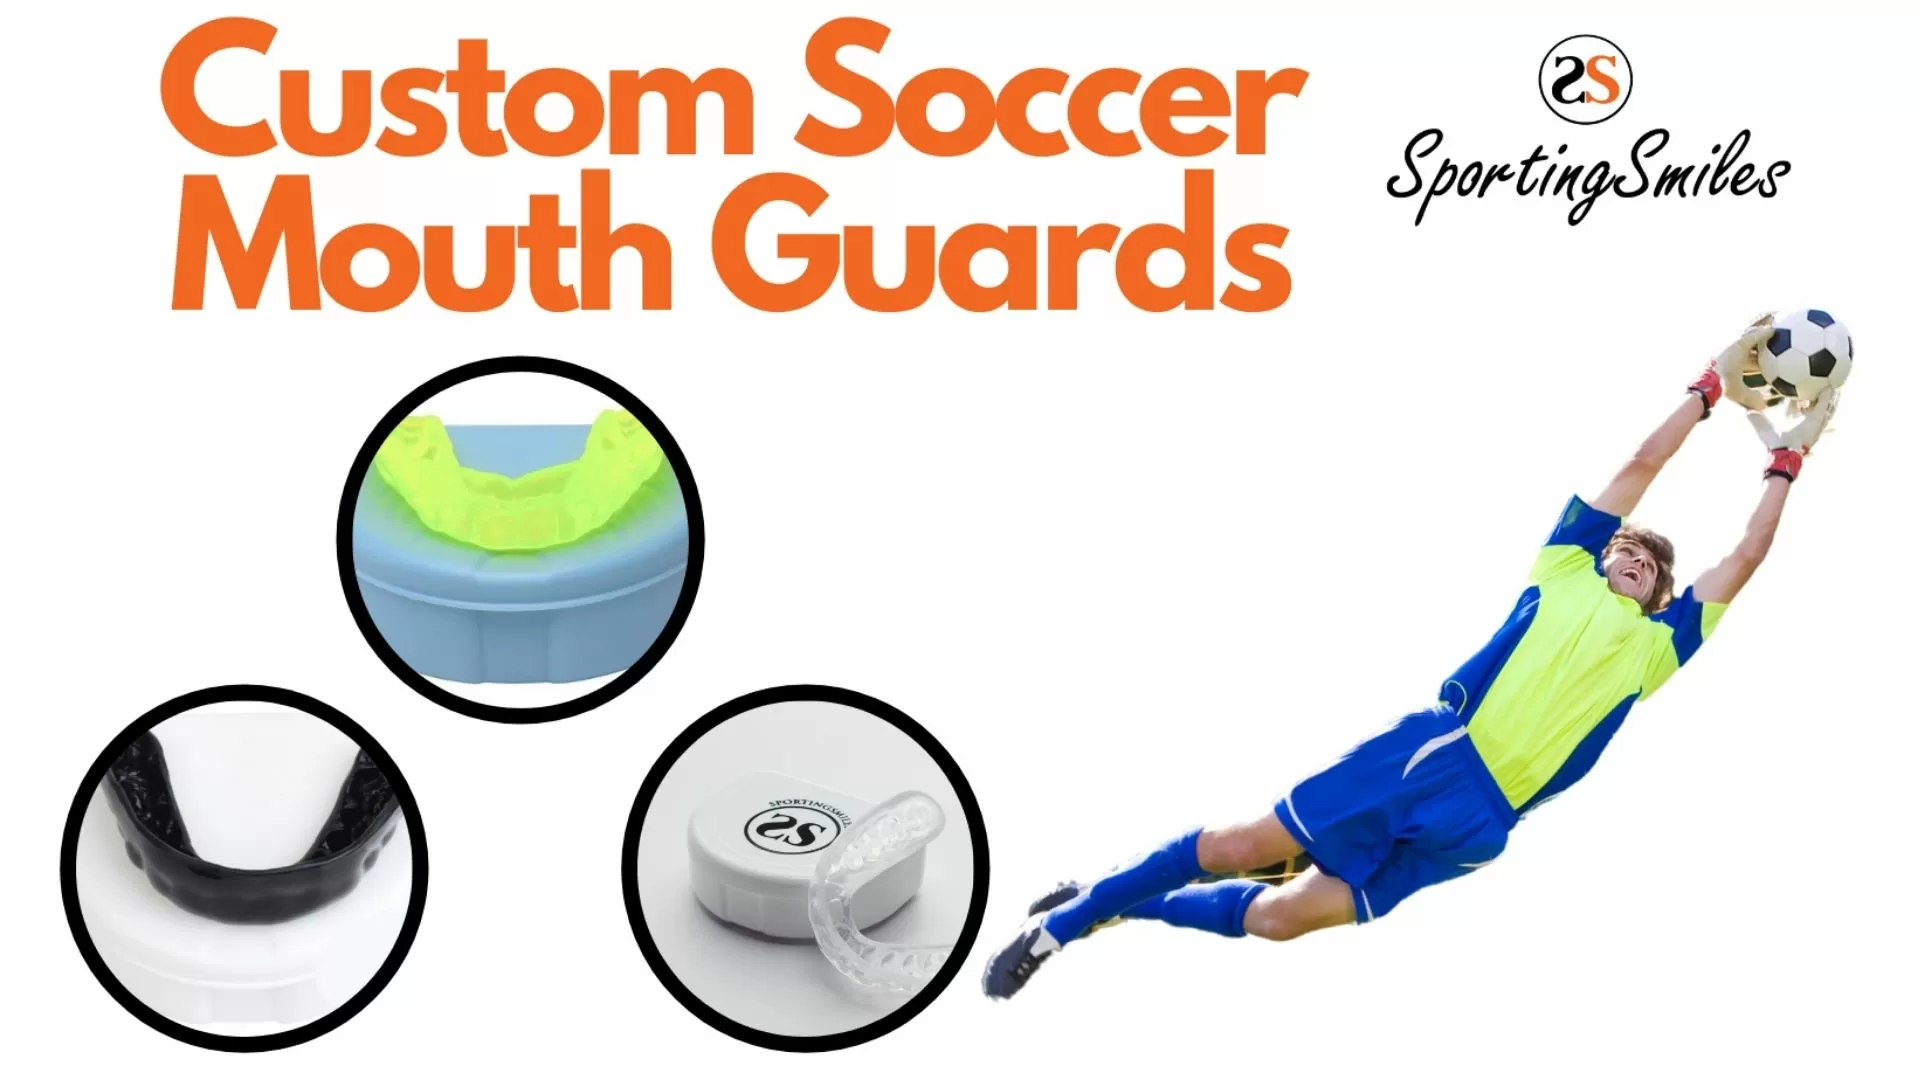 Custom Soccer Mouth Guards